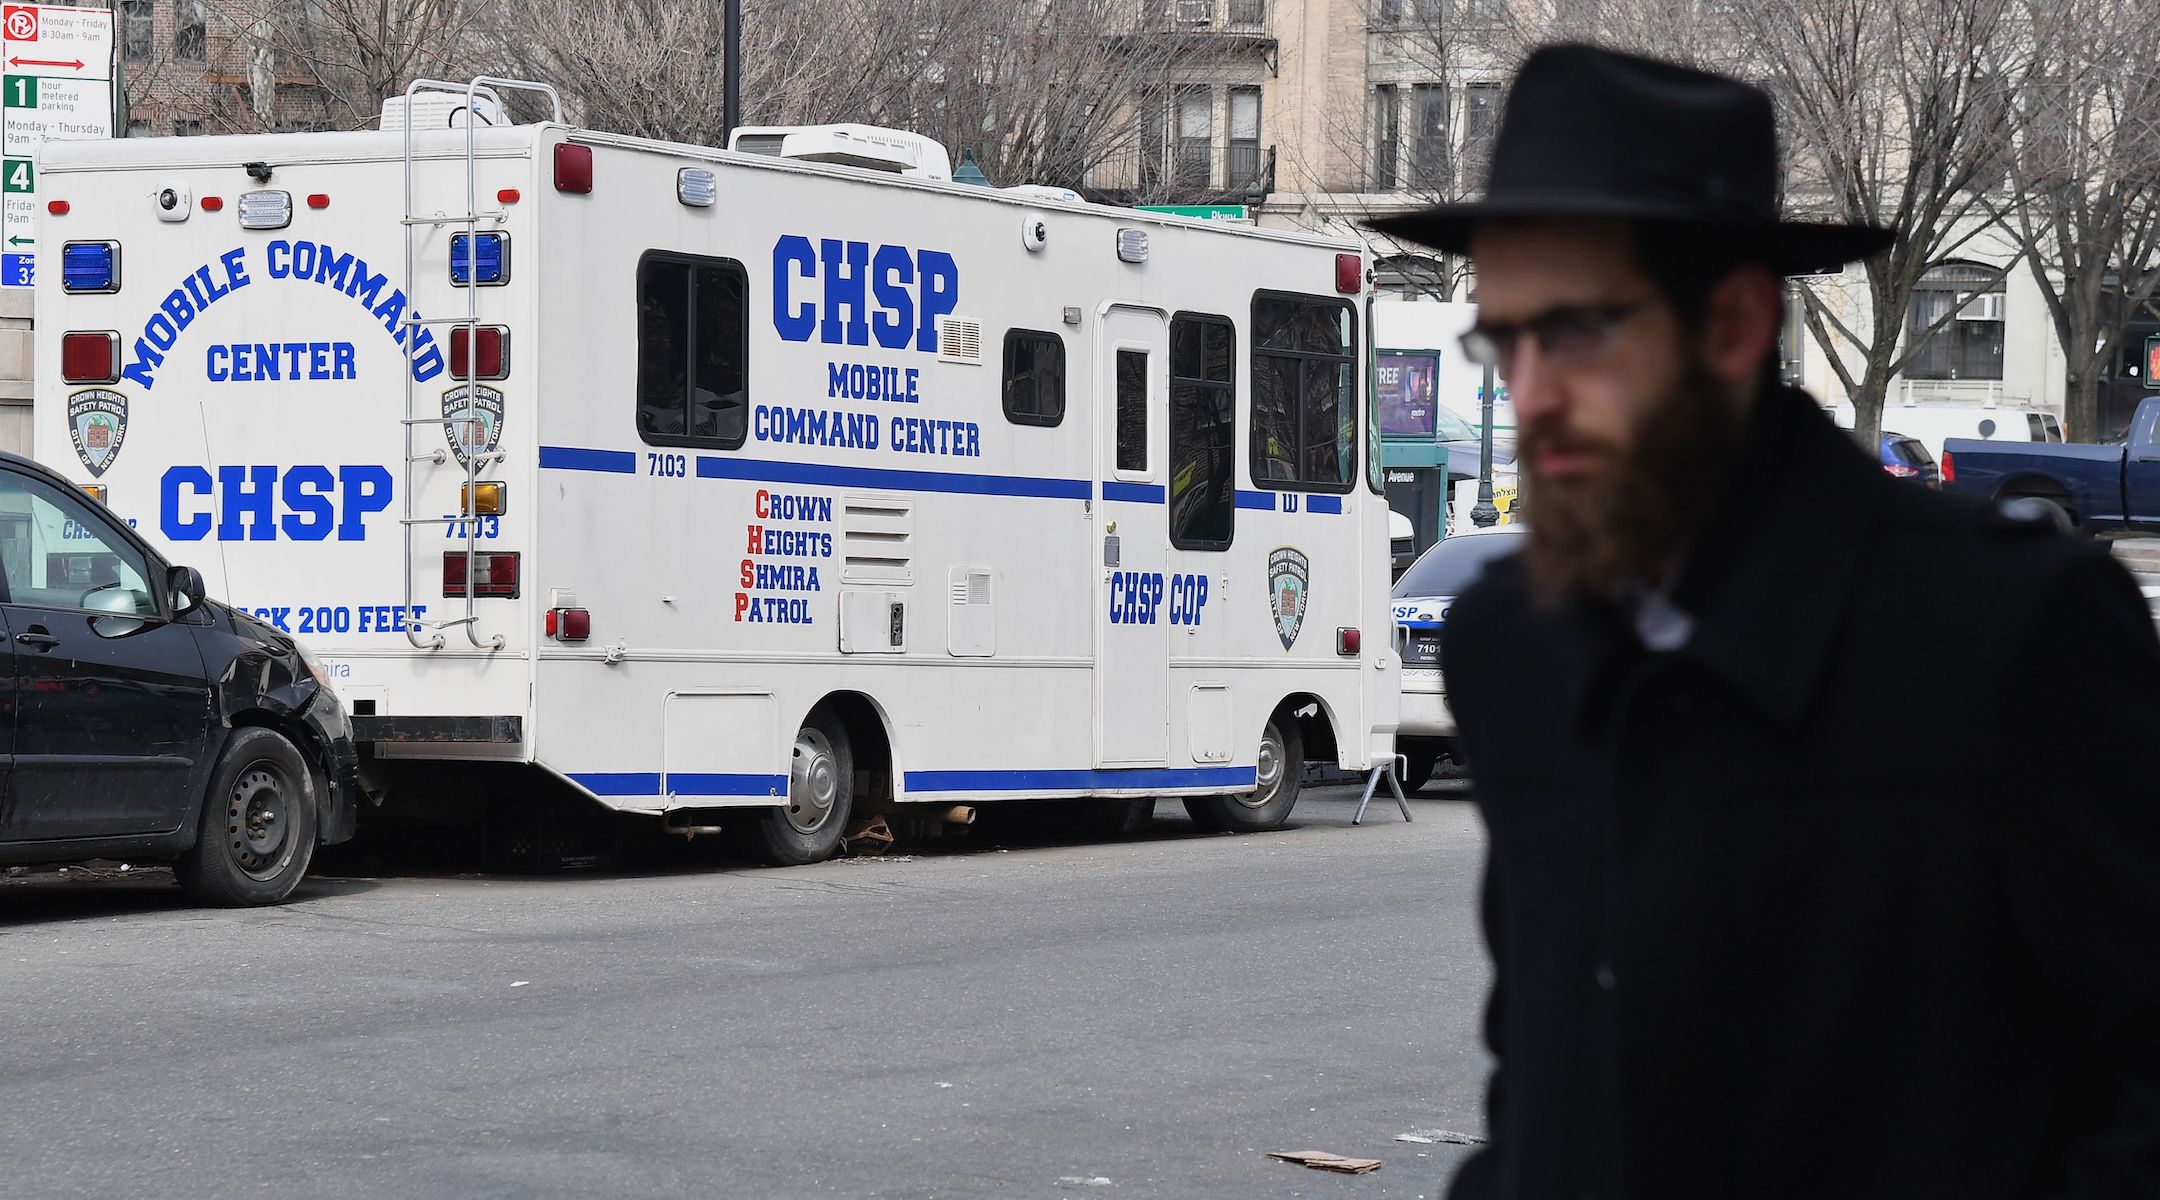 An Orthodox Jew walks past a Crown Heights Shmira Patrol security vehicle in the Brooklyn neighborhood of Crown Heights on February 27, 2019. (Angela Weiss//AFP via Getty Images)